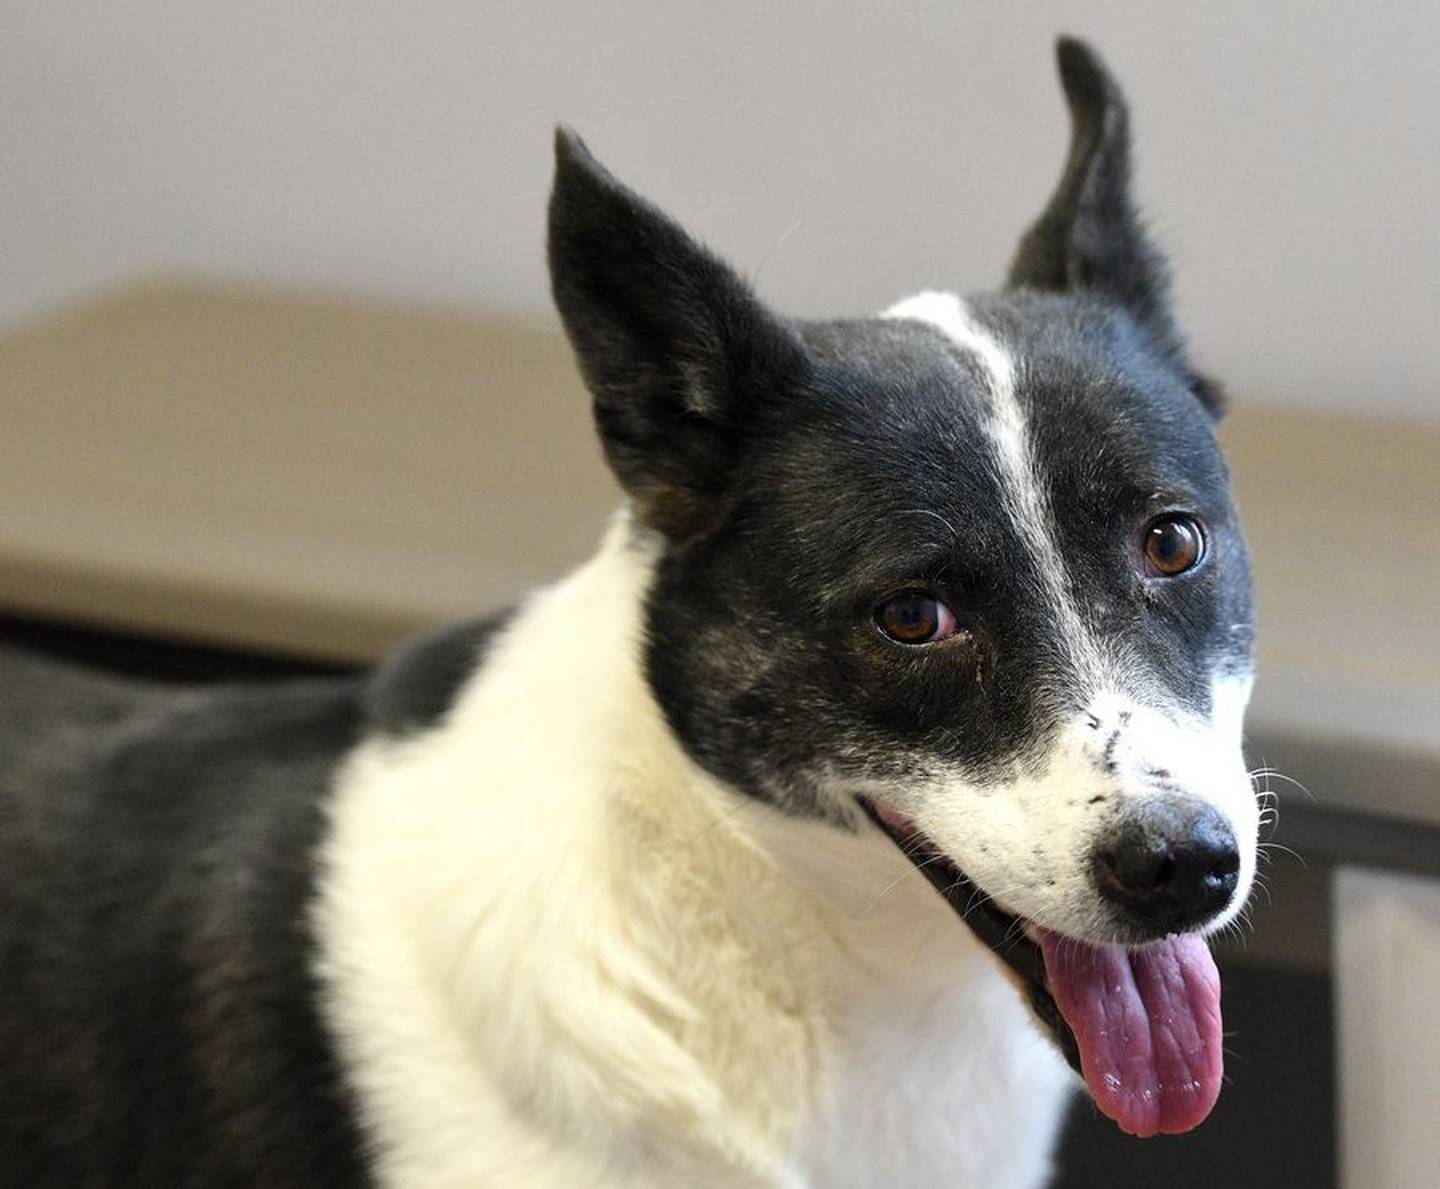 Harper was one of three dogs brought to Anderson Humane in South Elgin on Friday after being rescued from a South Korean dog meat farm.